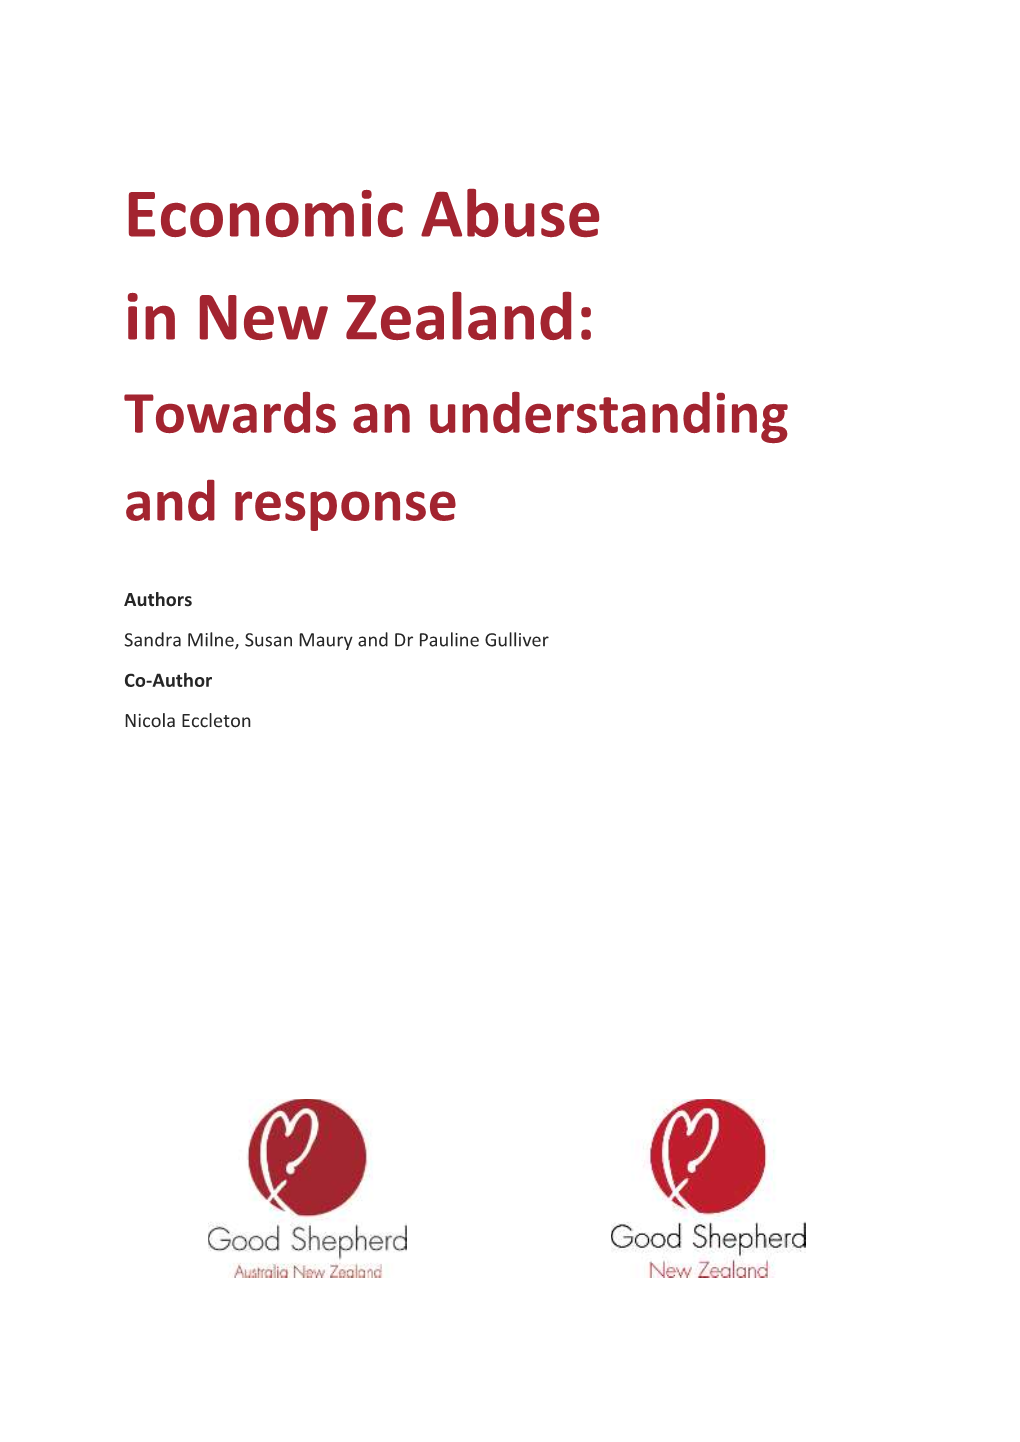 Economic Abuse in New Zealand: Towards an Understanding and Response